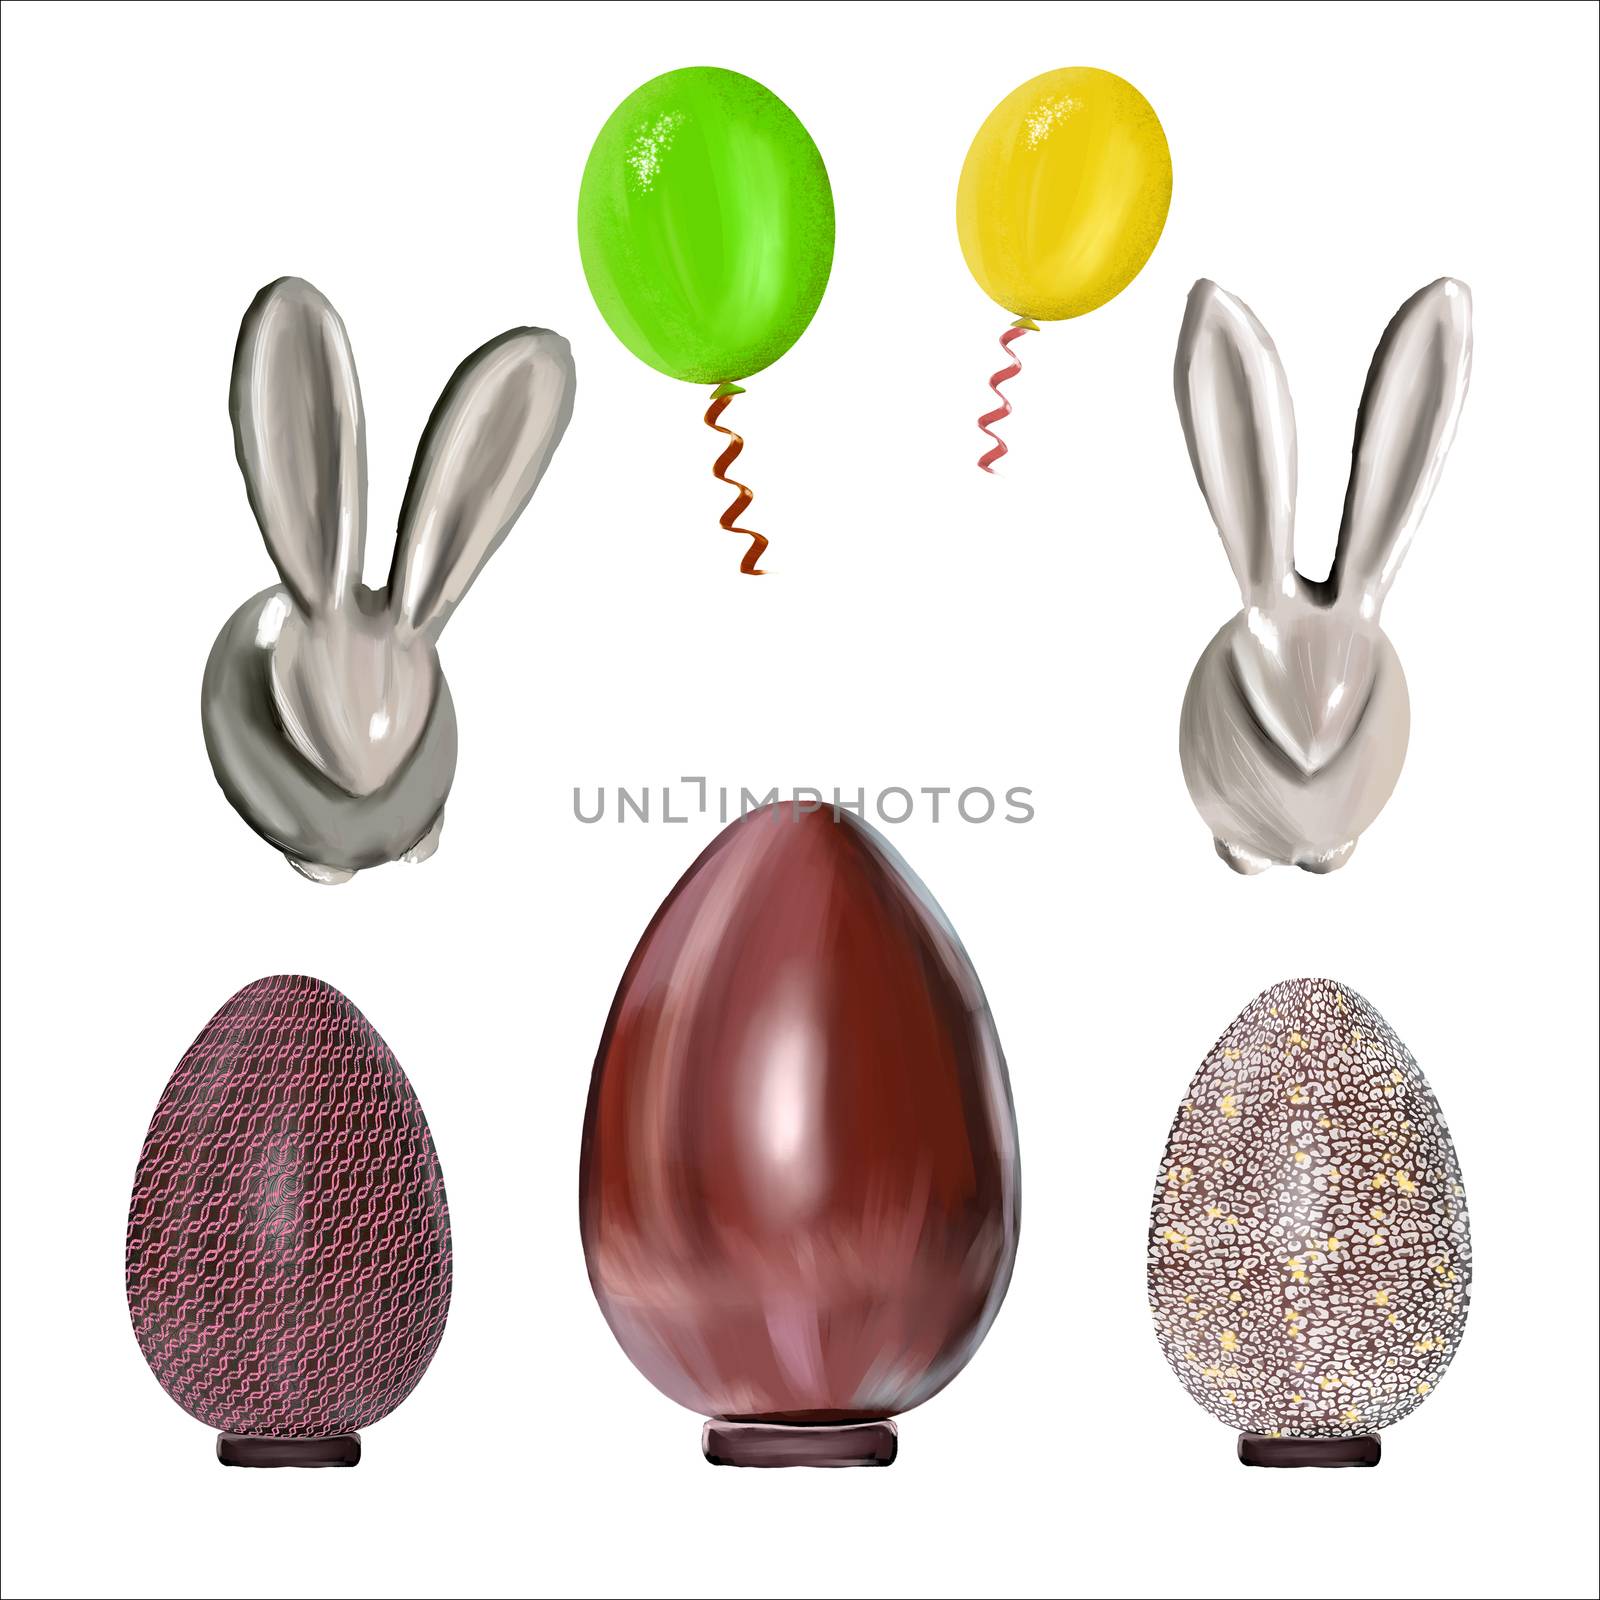 Ceramic easter bunny, balloons and Easter eggs set isolated on white background. by Nata_Prando